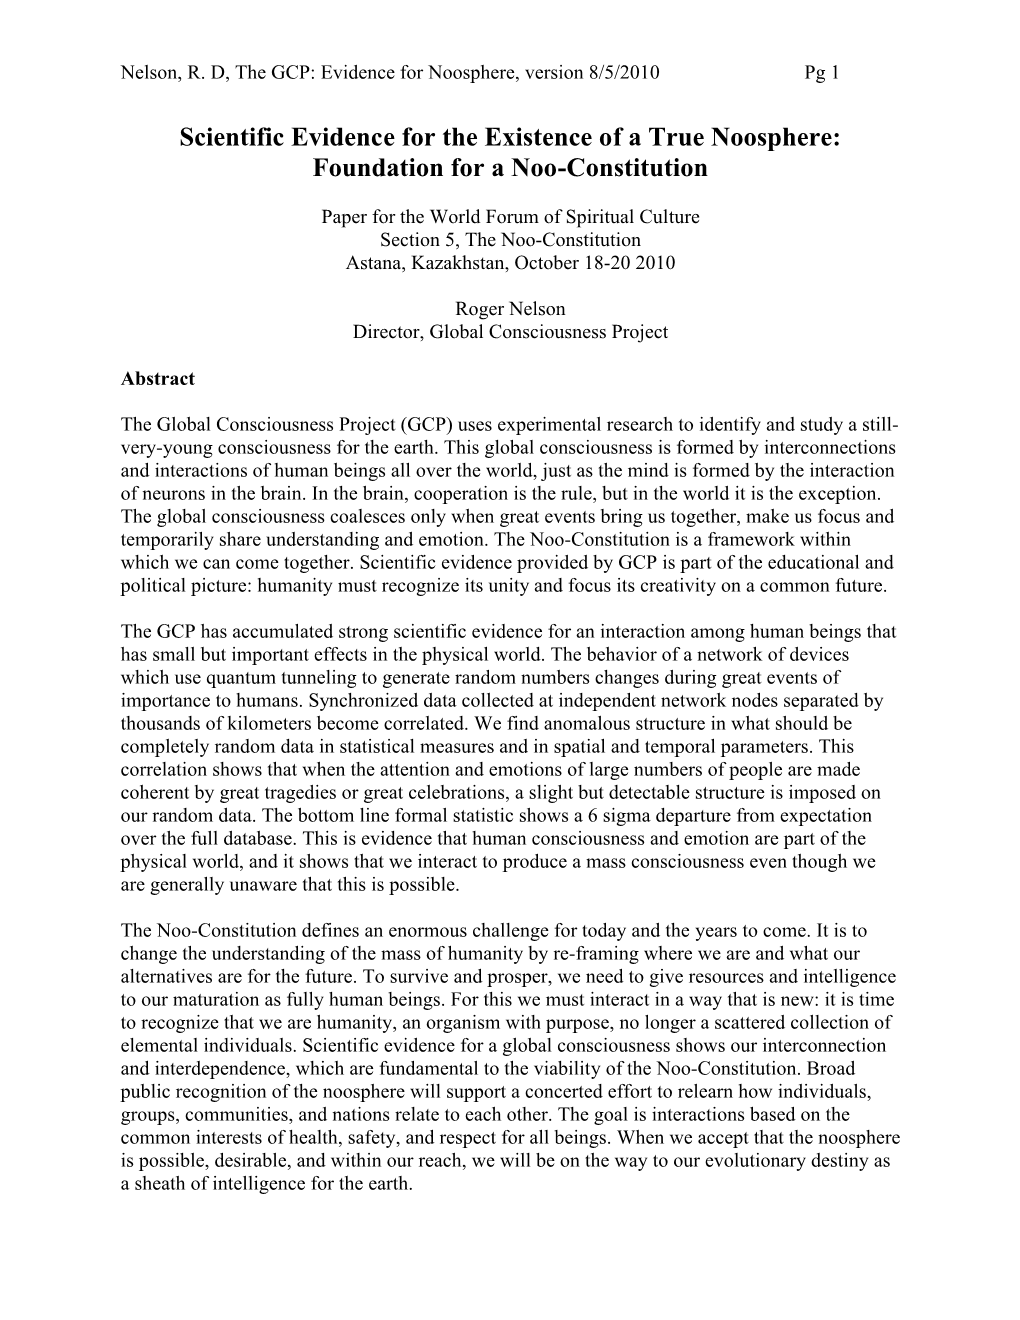 Scientific Evidence for the Existence of a True Noosphere: Foundation for a Noo-Constitution